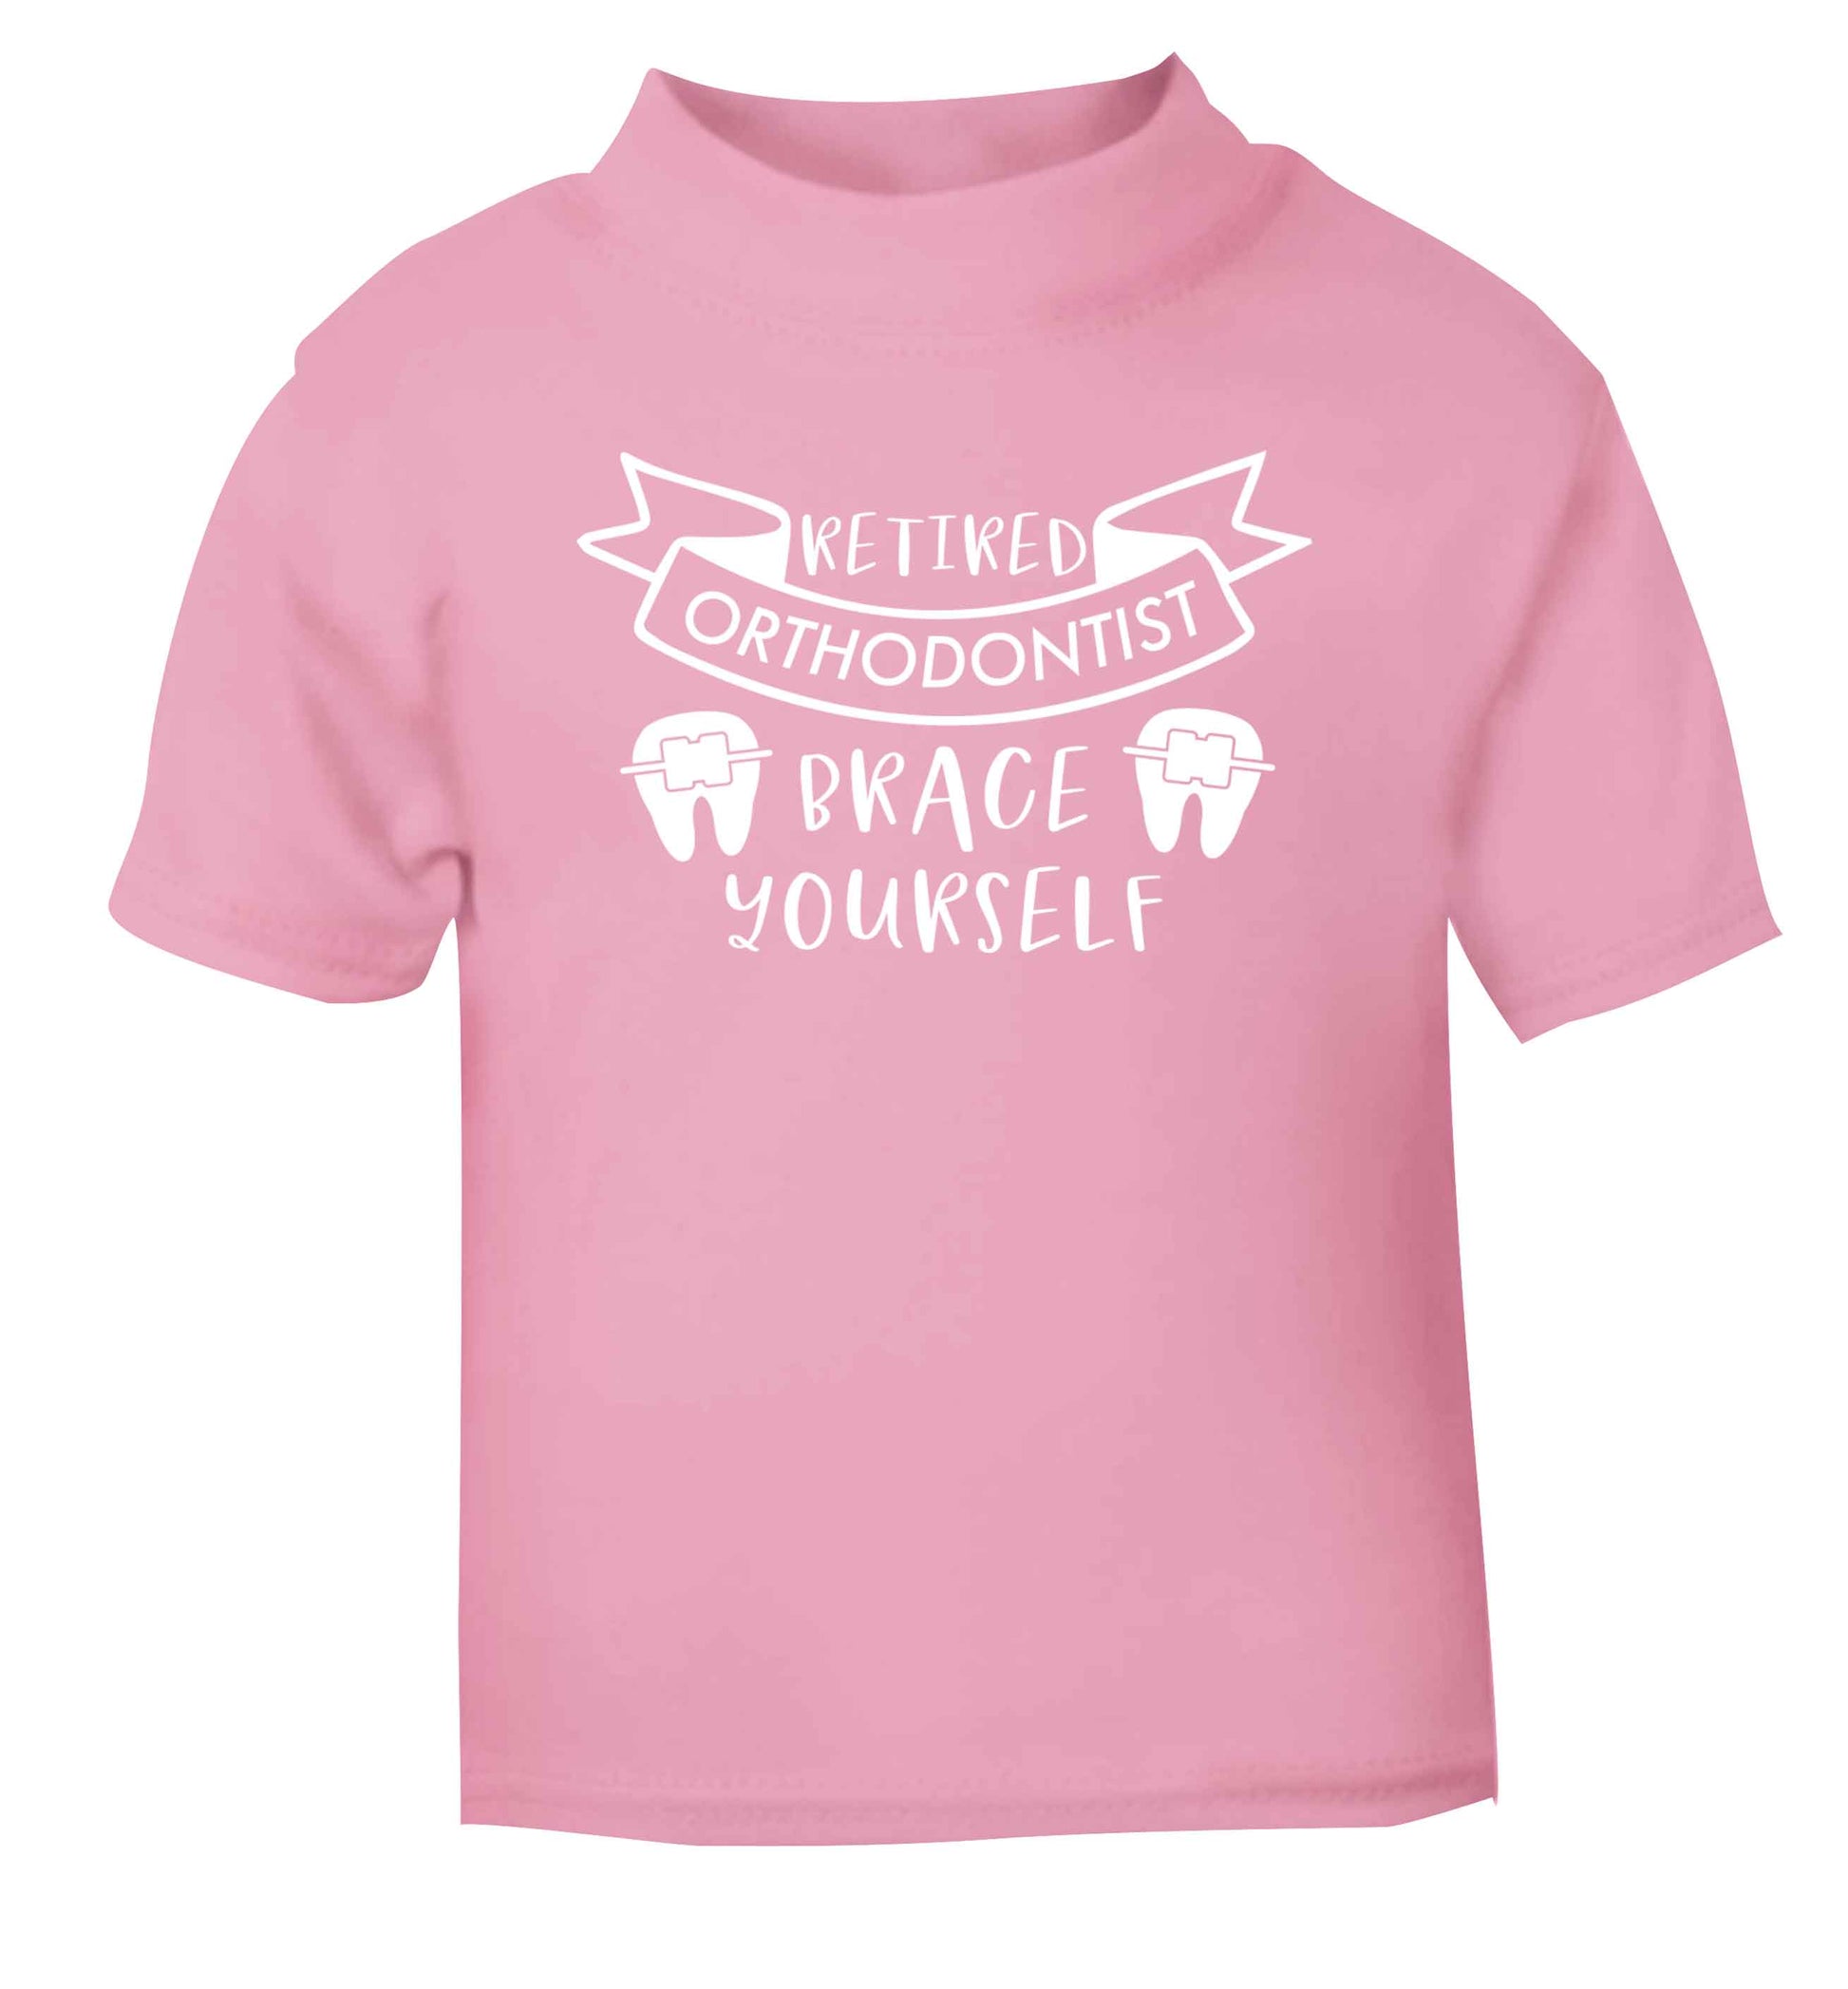 Retired orthodontist brace yourself light pink Baby Toddler Tshirt 2 Years